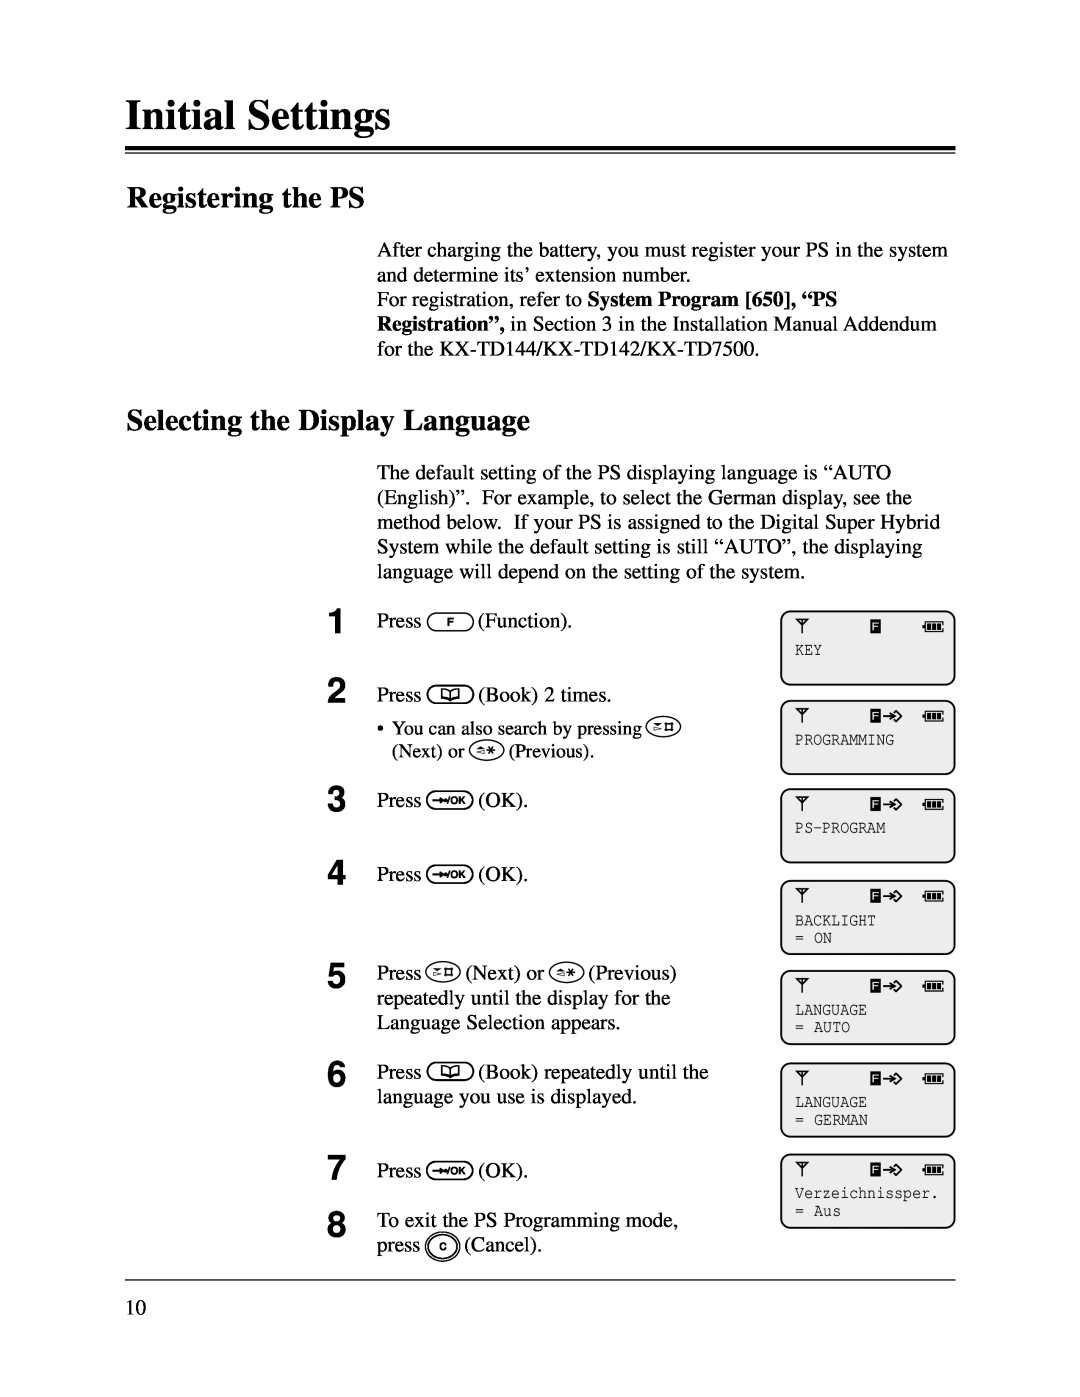 Panasonic KX-TD1232CE, KX-TD816CE Initial Settings, 1 2 3 4 5 6 7 8, Registering the PS, Selecting the Display Language 